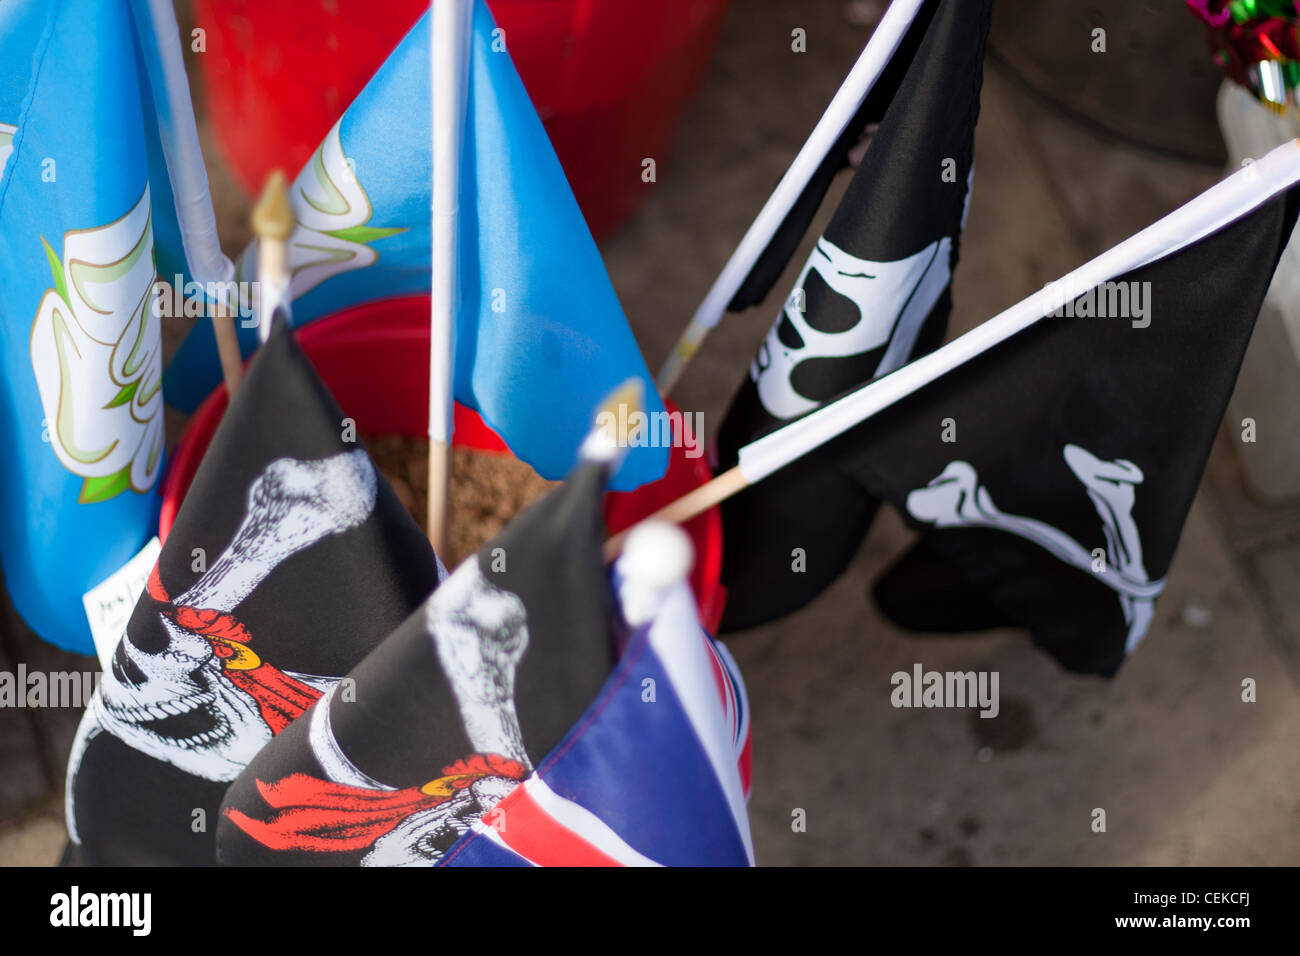 A bucket of sand holding many flags including pirate skull and crossbones flags ready to buy by tourists at the seaside Stock Photo